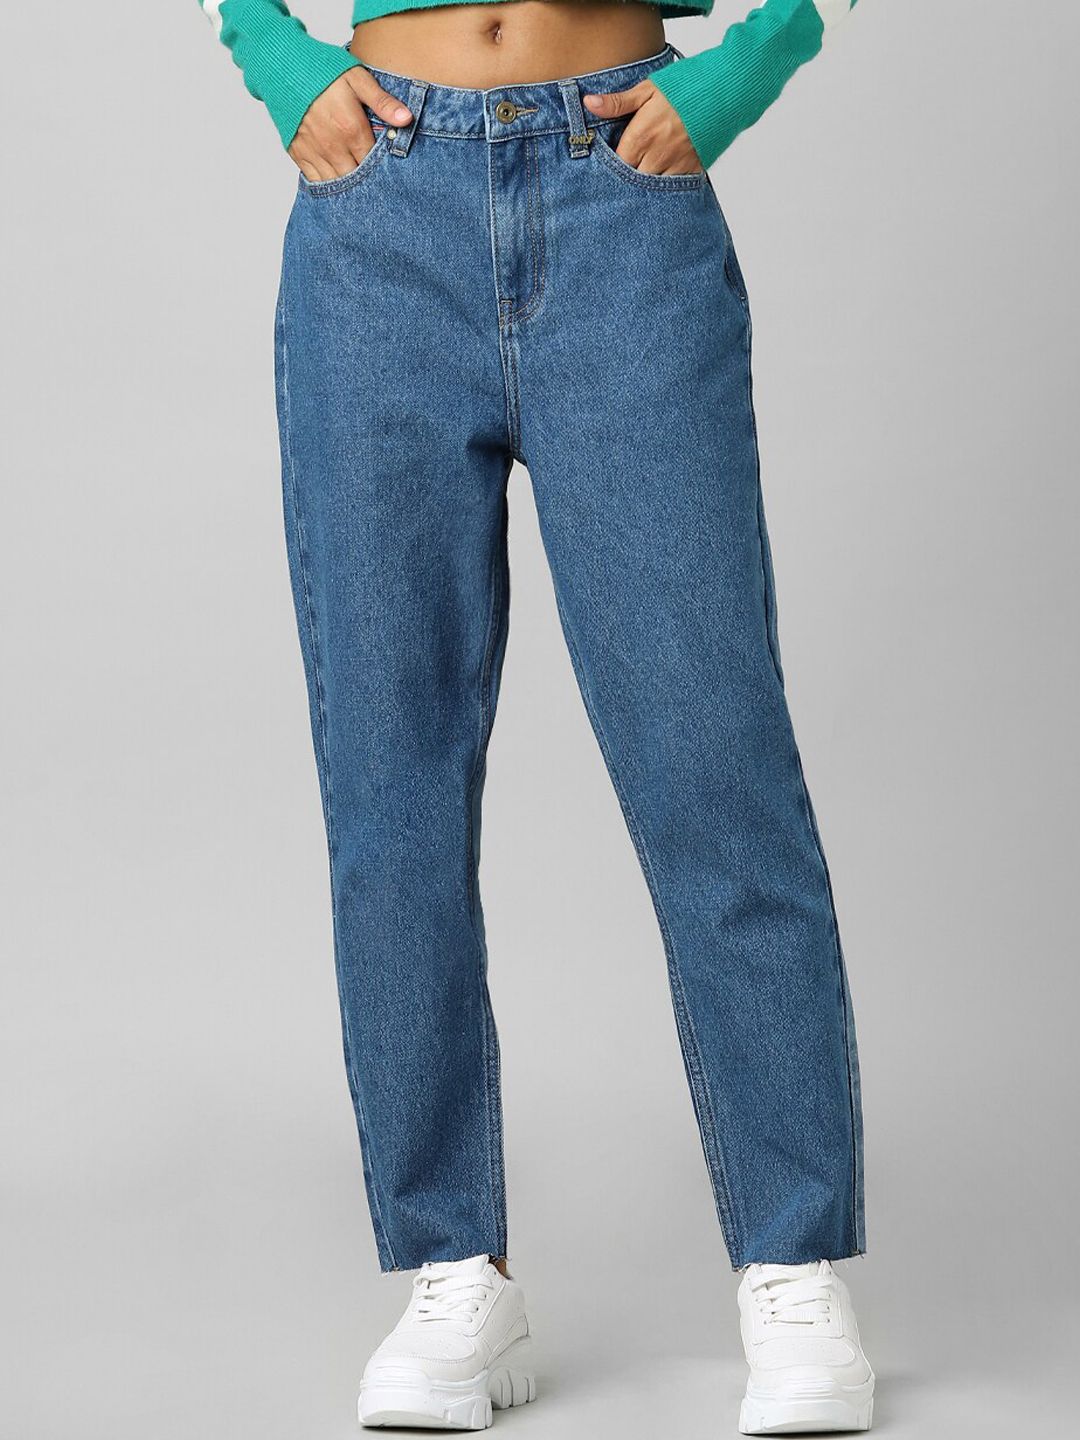 ONLY Women Blue Straight Fit High-Rise Light Fade Jeans Price in India